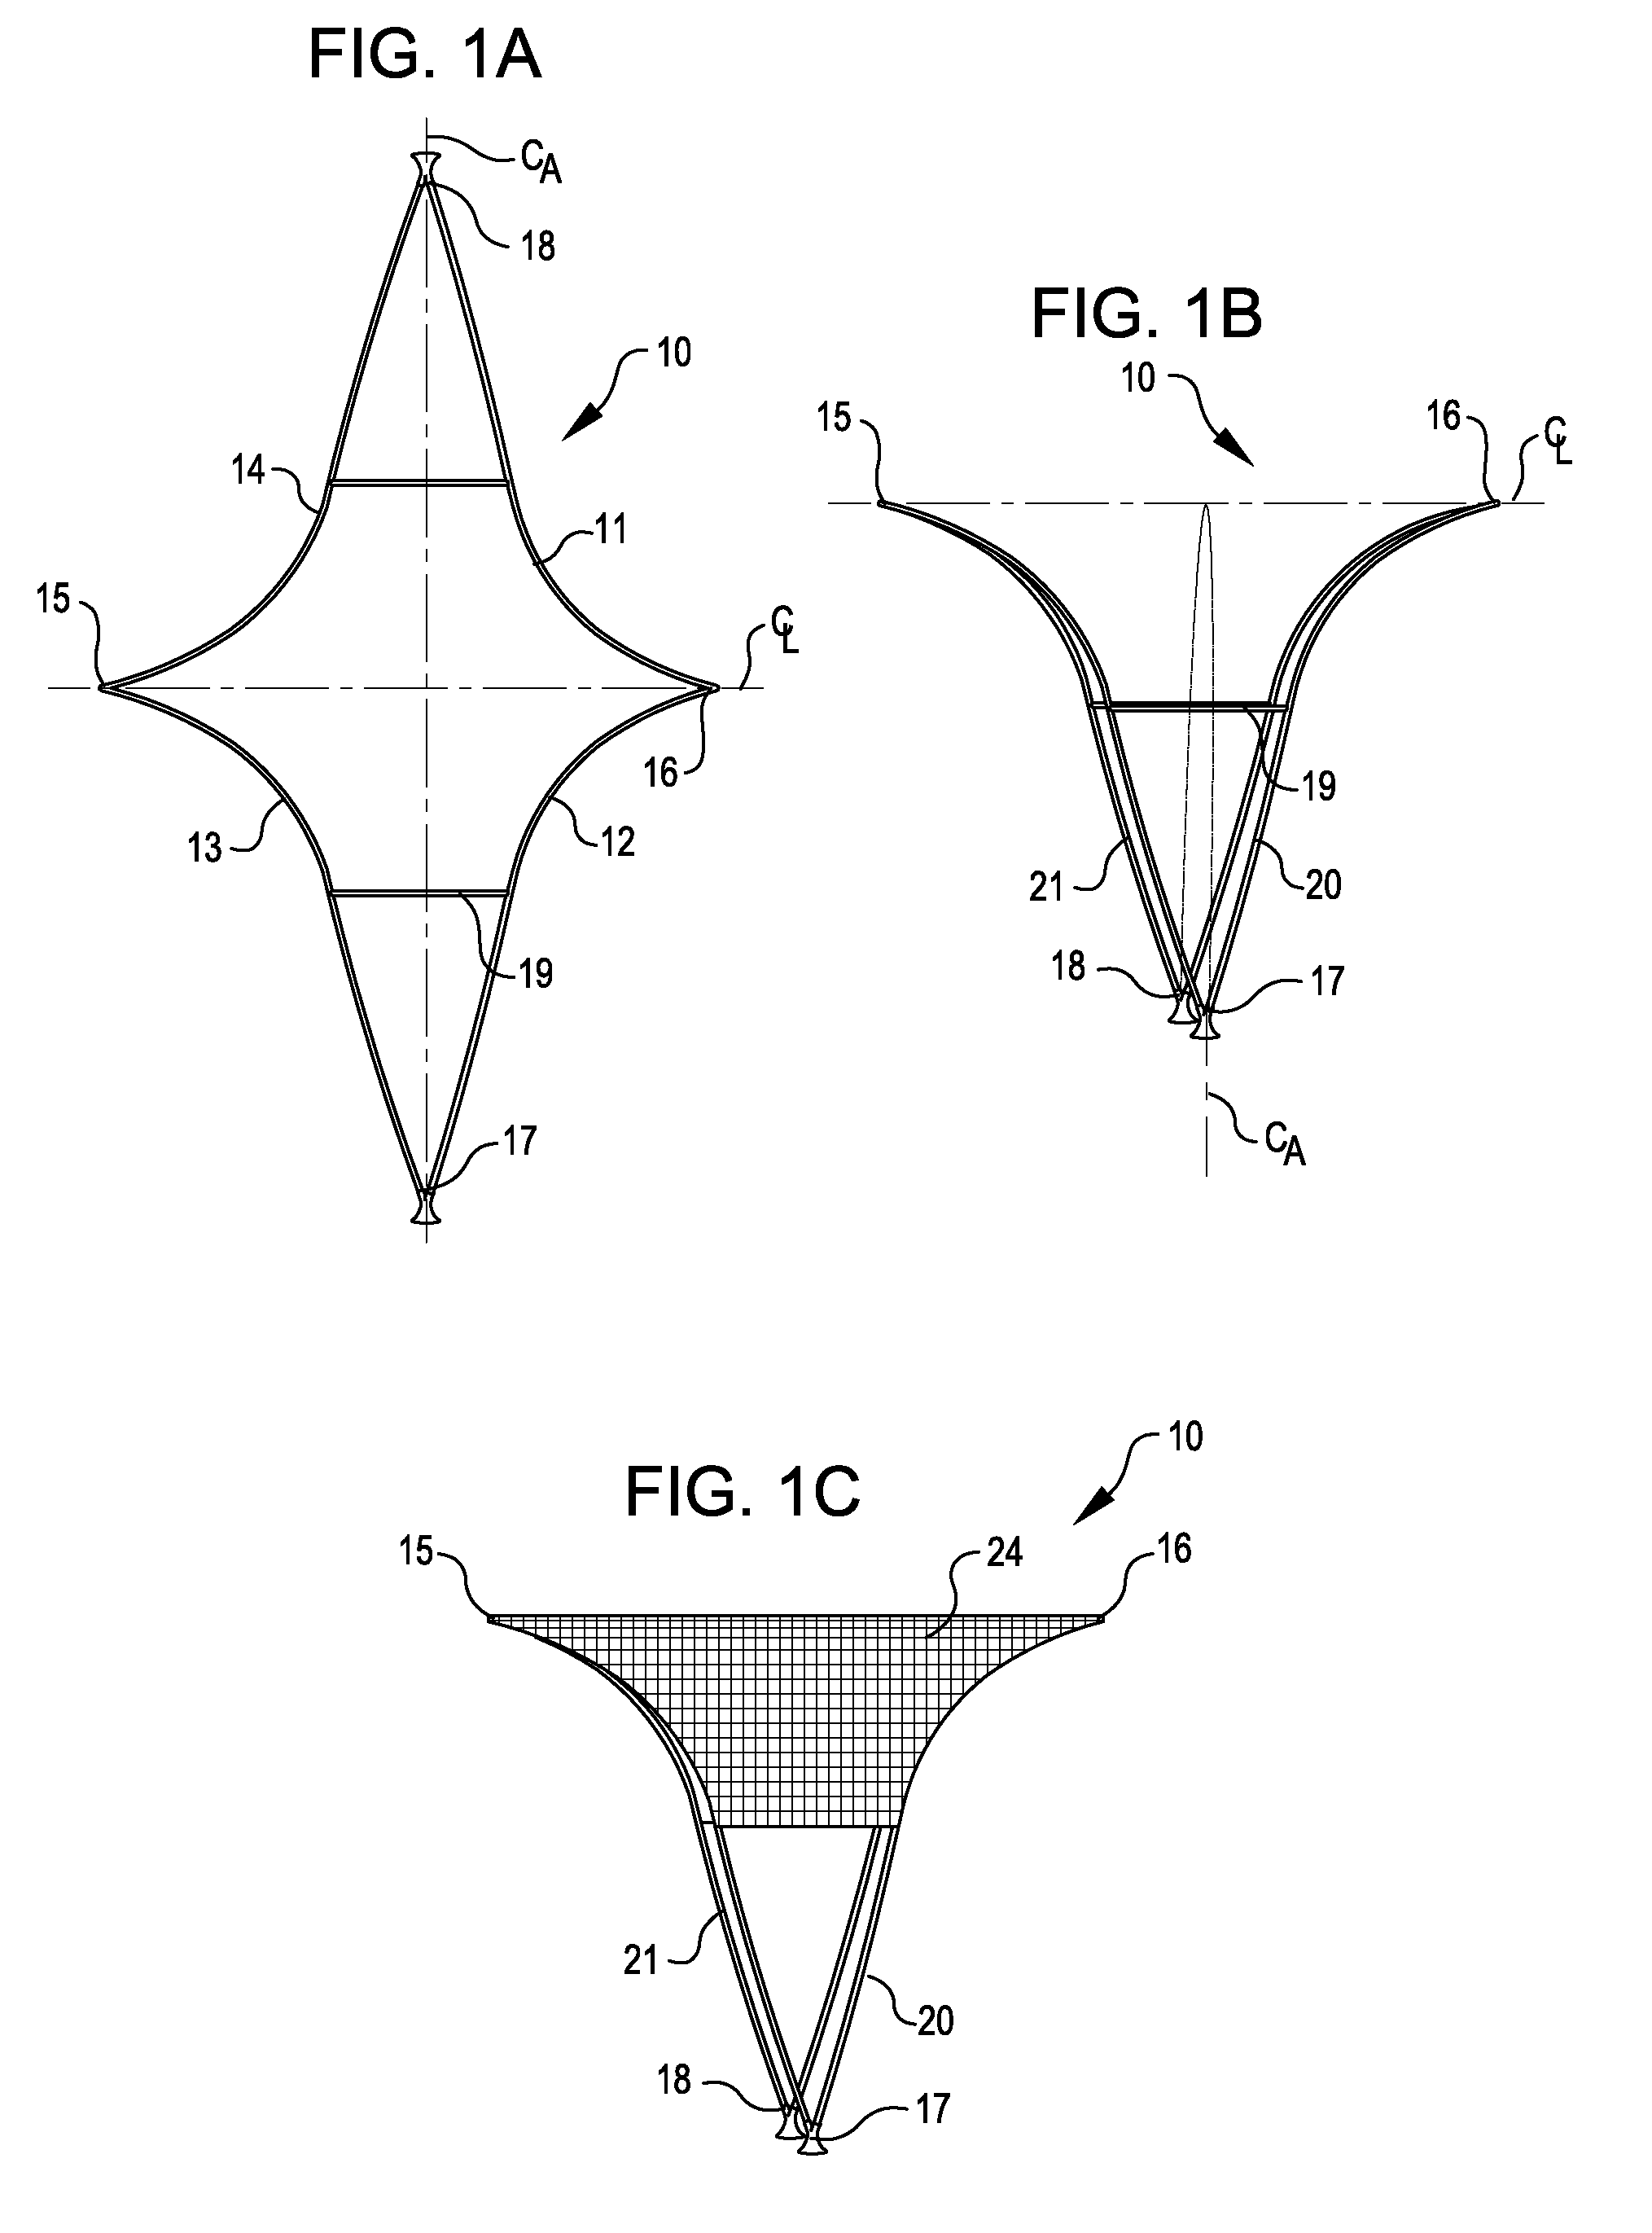 Systems and methods for supporting or occluding a physiological opening or cavity